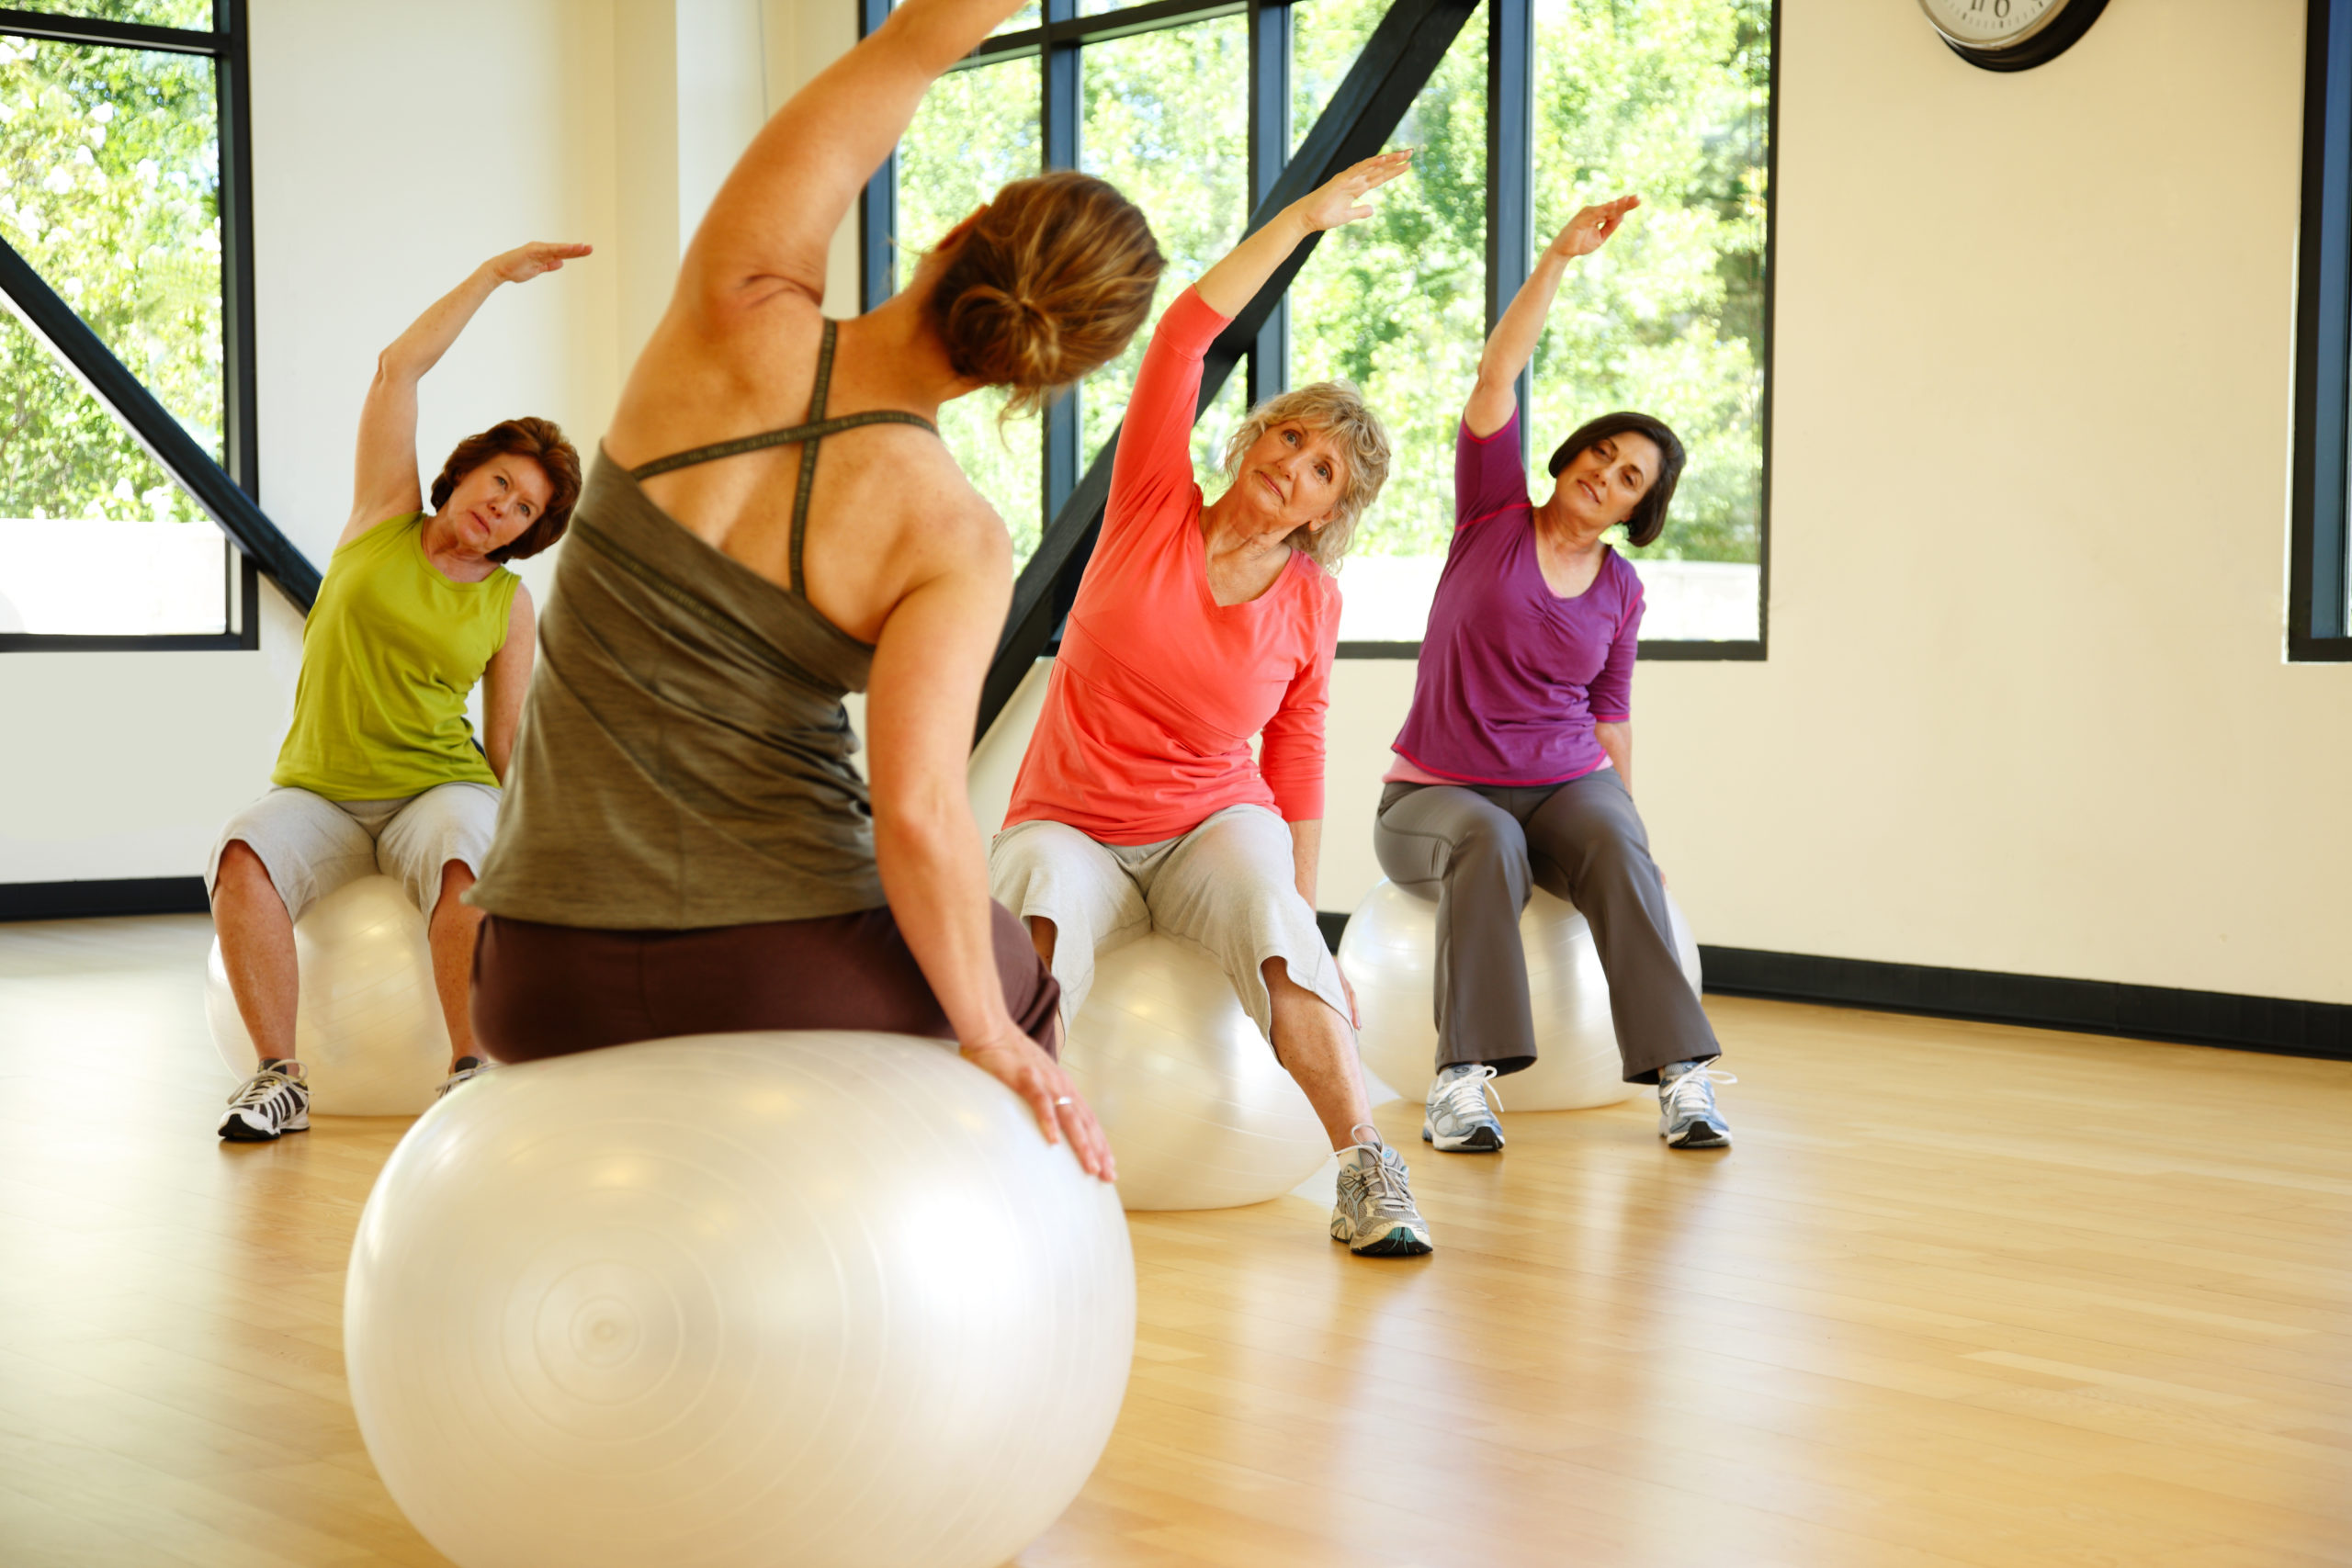 Physical activity tied to reduced fracture risk in breast cancer patients on hormone therapy